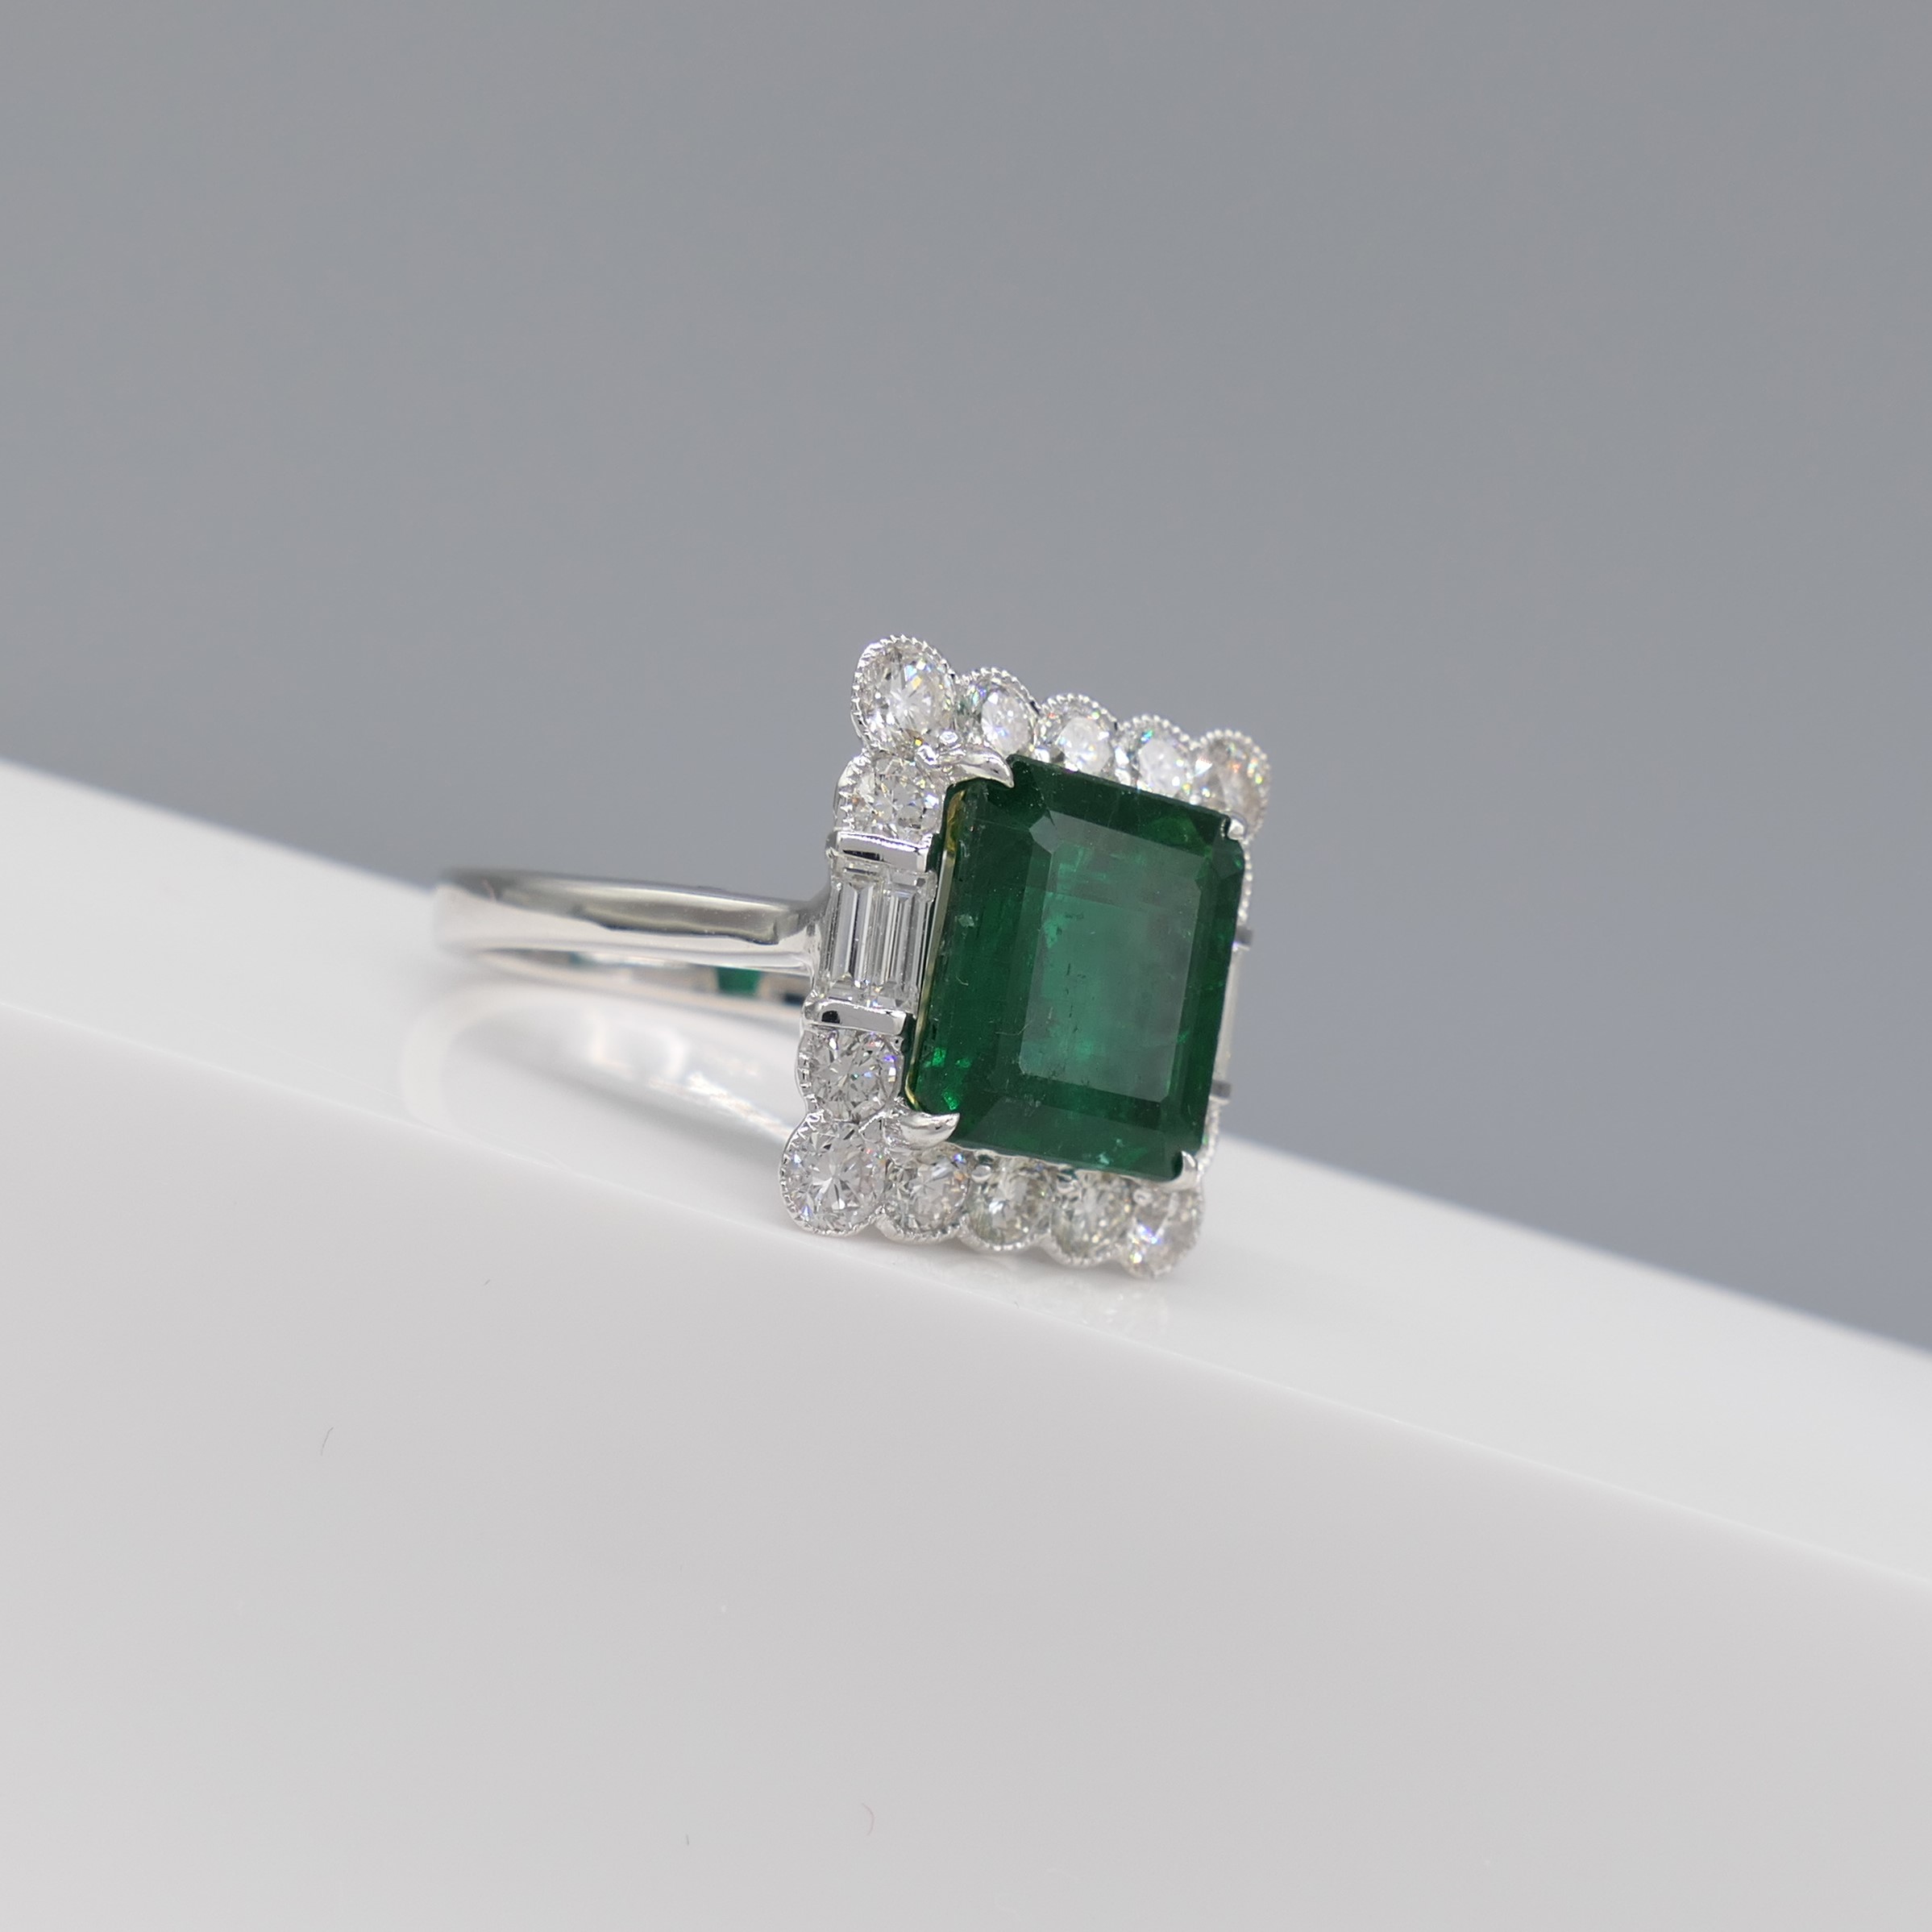 18ct White Gold Cocktail Ring Set With A Large Emerald and Diamonds - Image 3 of 7